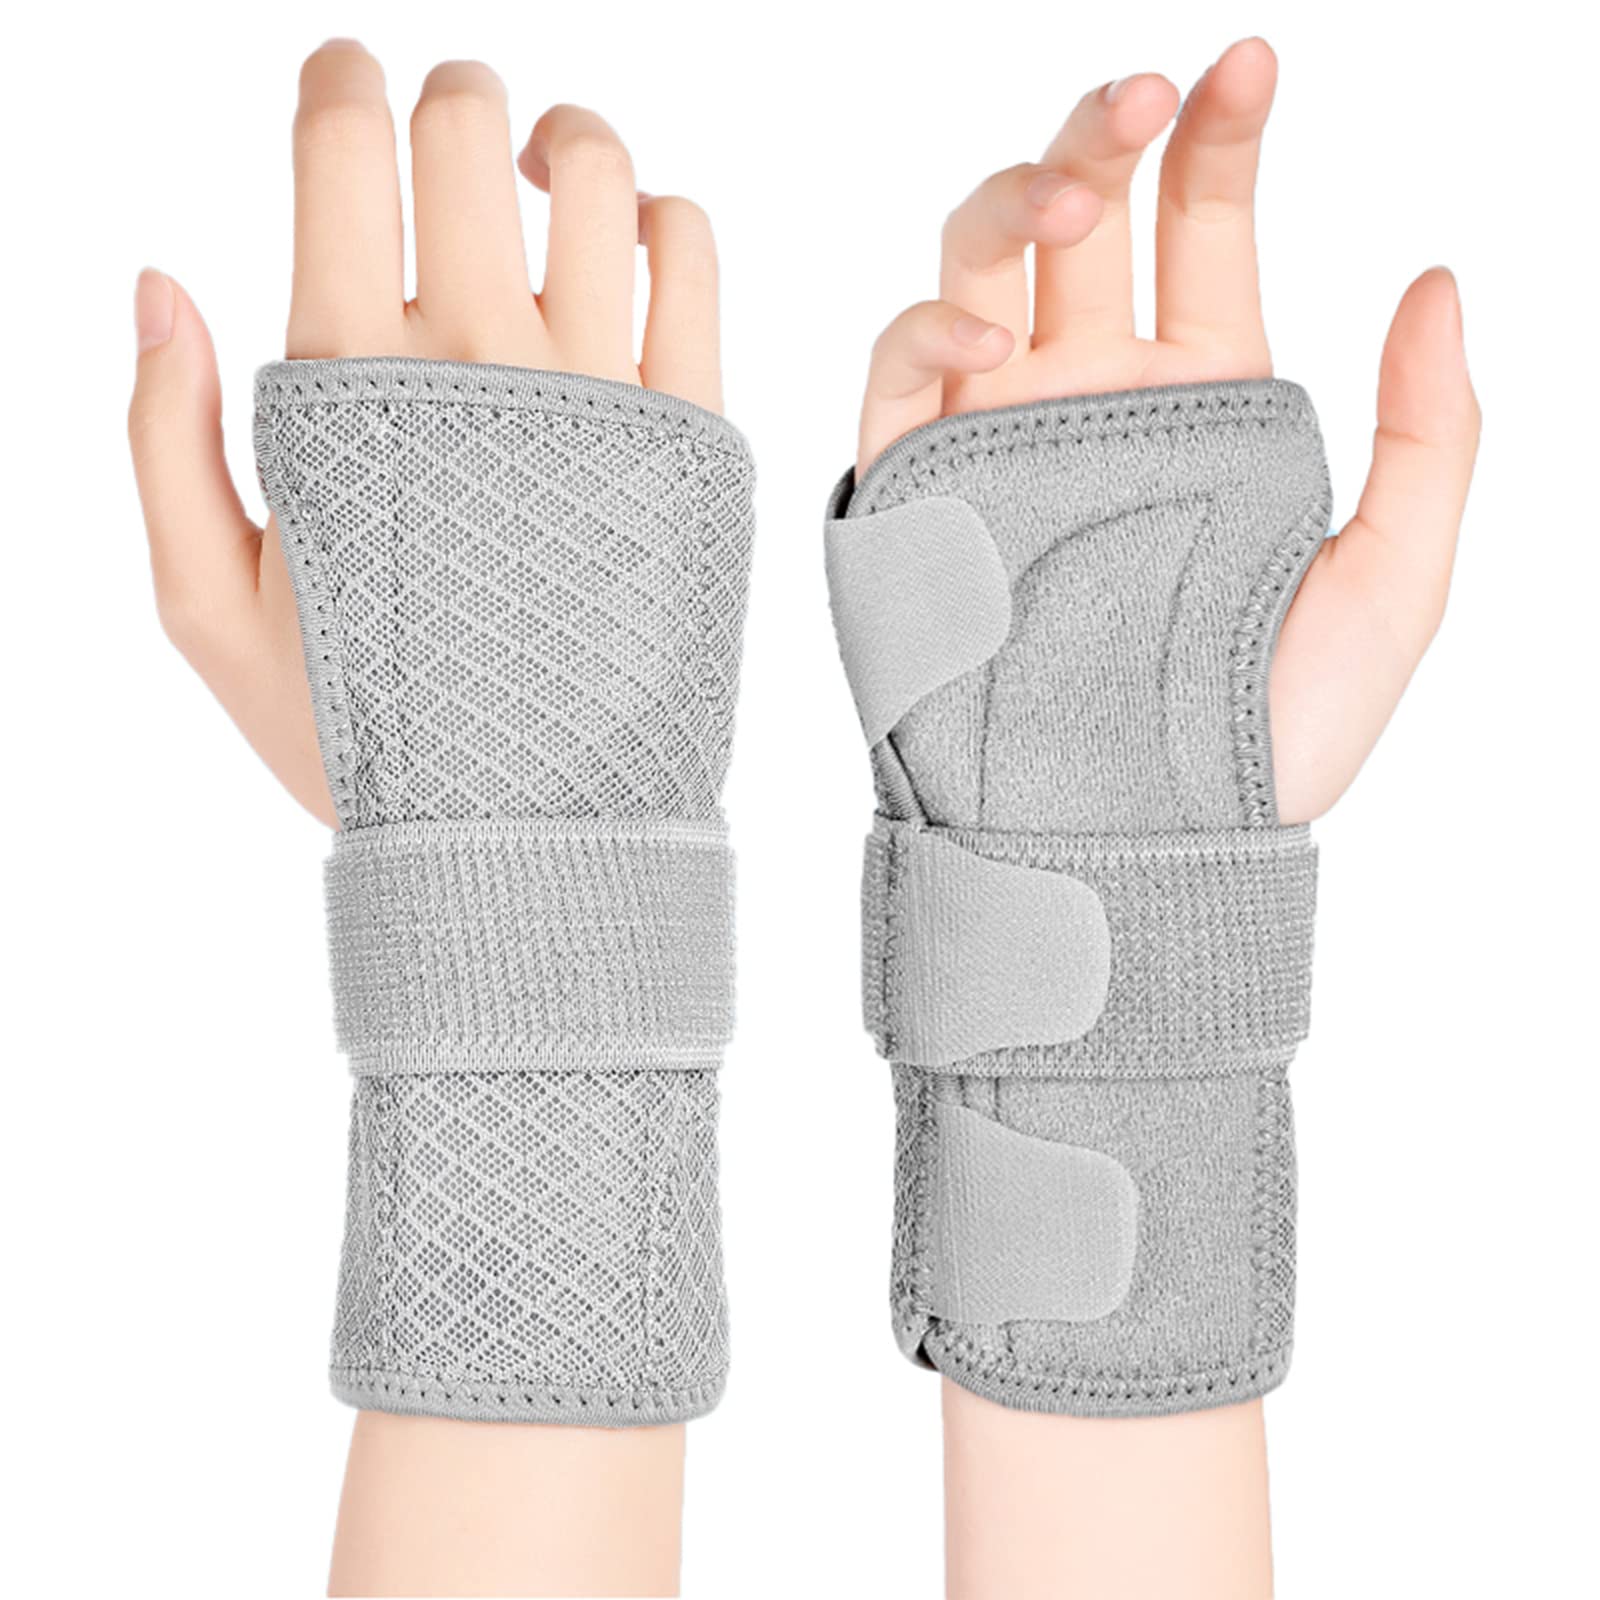 Carpal Tunnel Wrist Brace, Night Sleep Support Splint - Fits Right Hand or  Left Hand, Pain Relief, Support Brace for Women, Men.